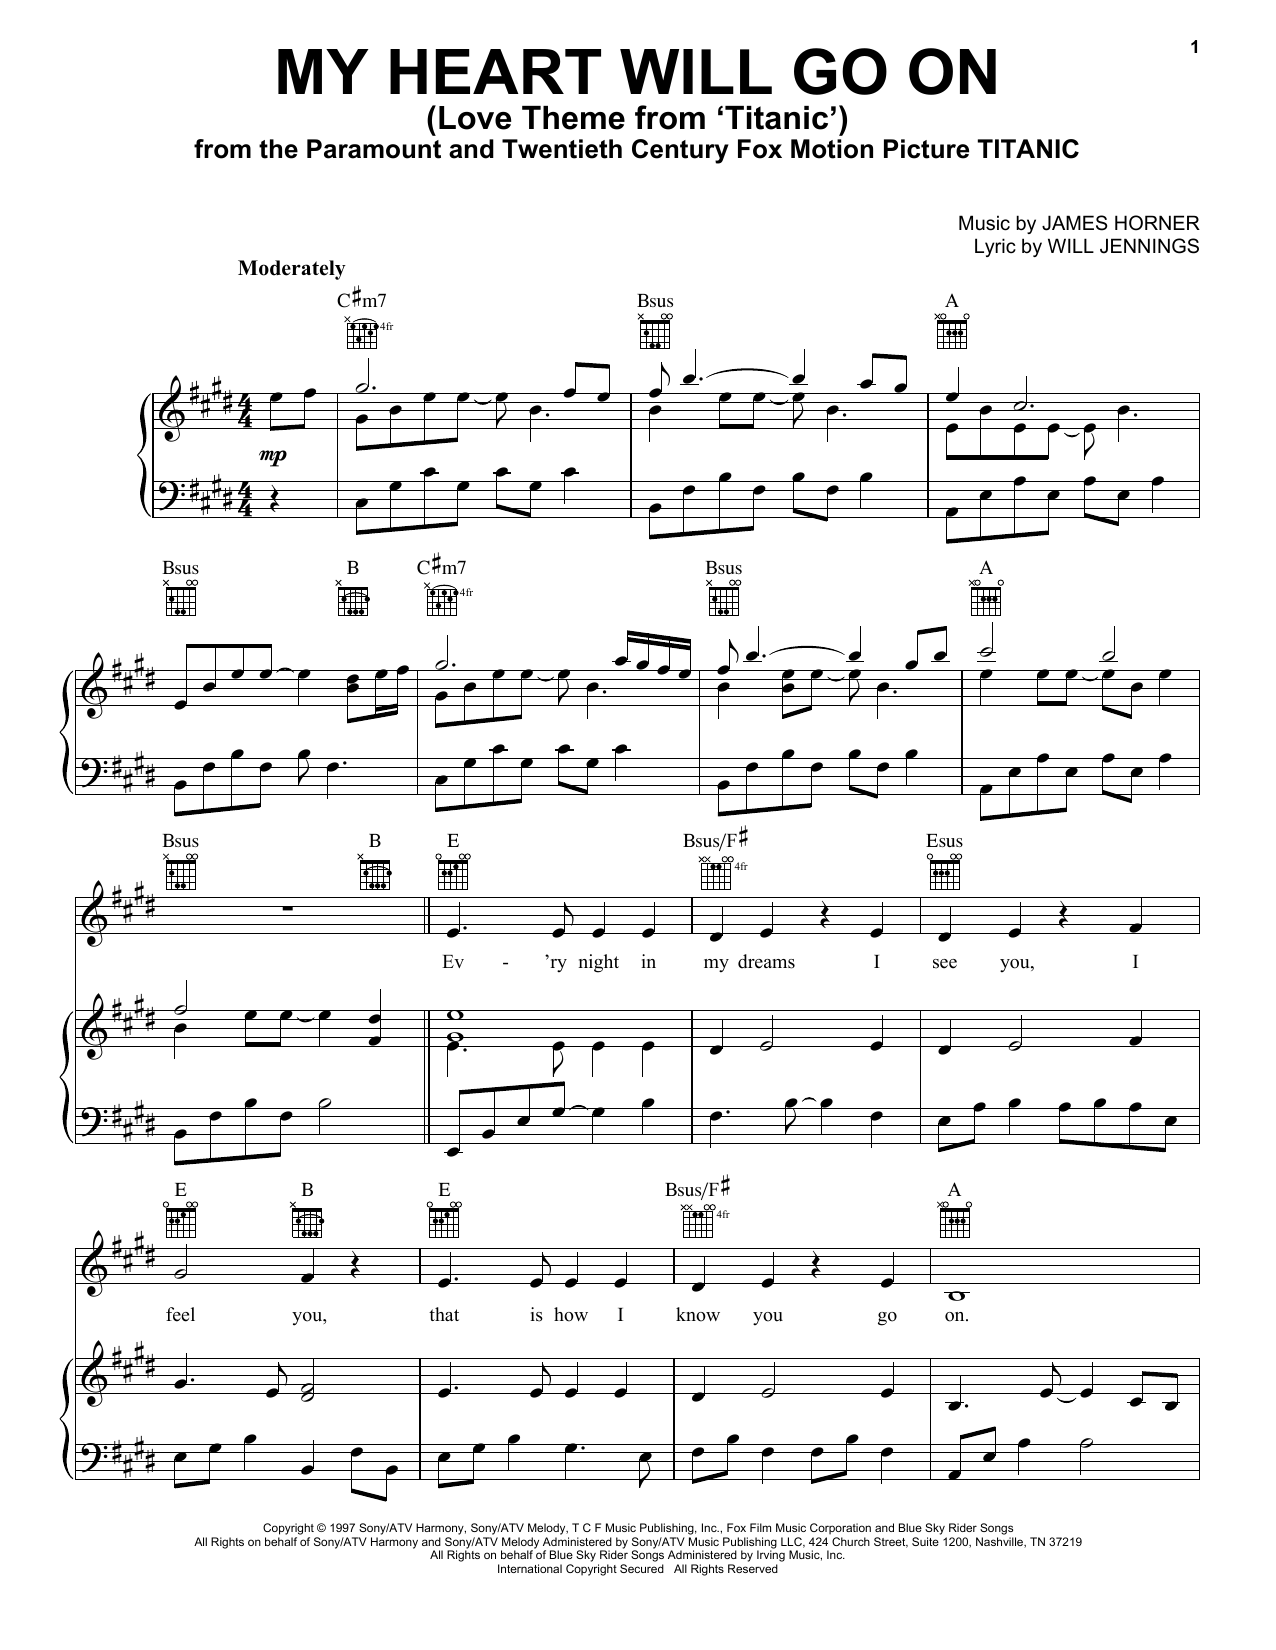 Celine Dion My Heart Will Go On (Love Theme from Titanic) Sheet Music